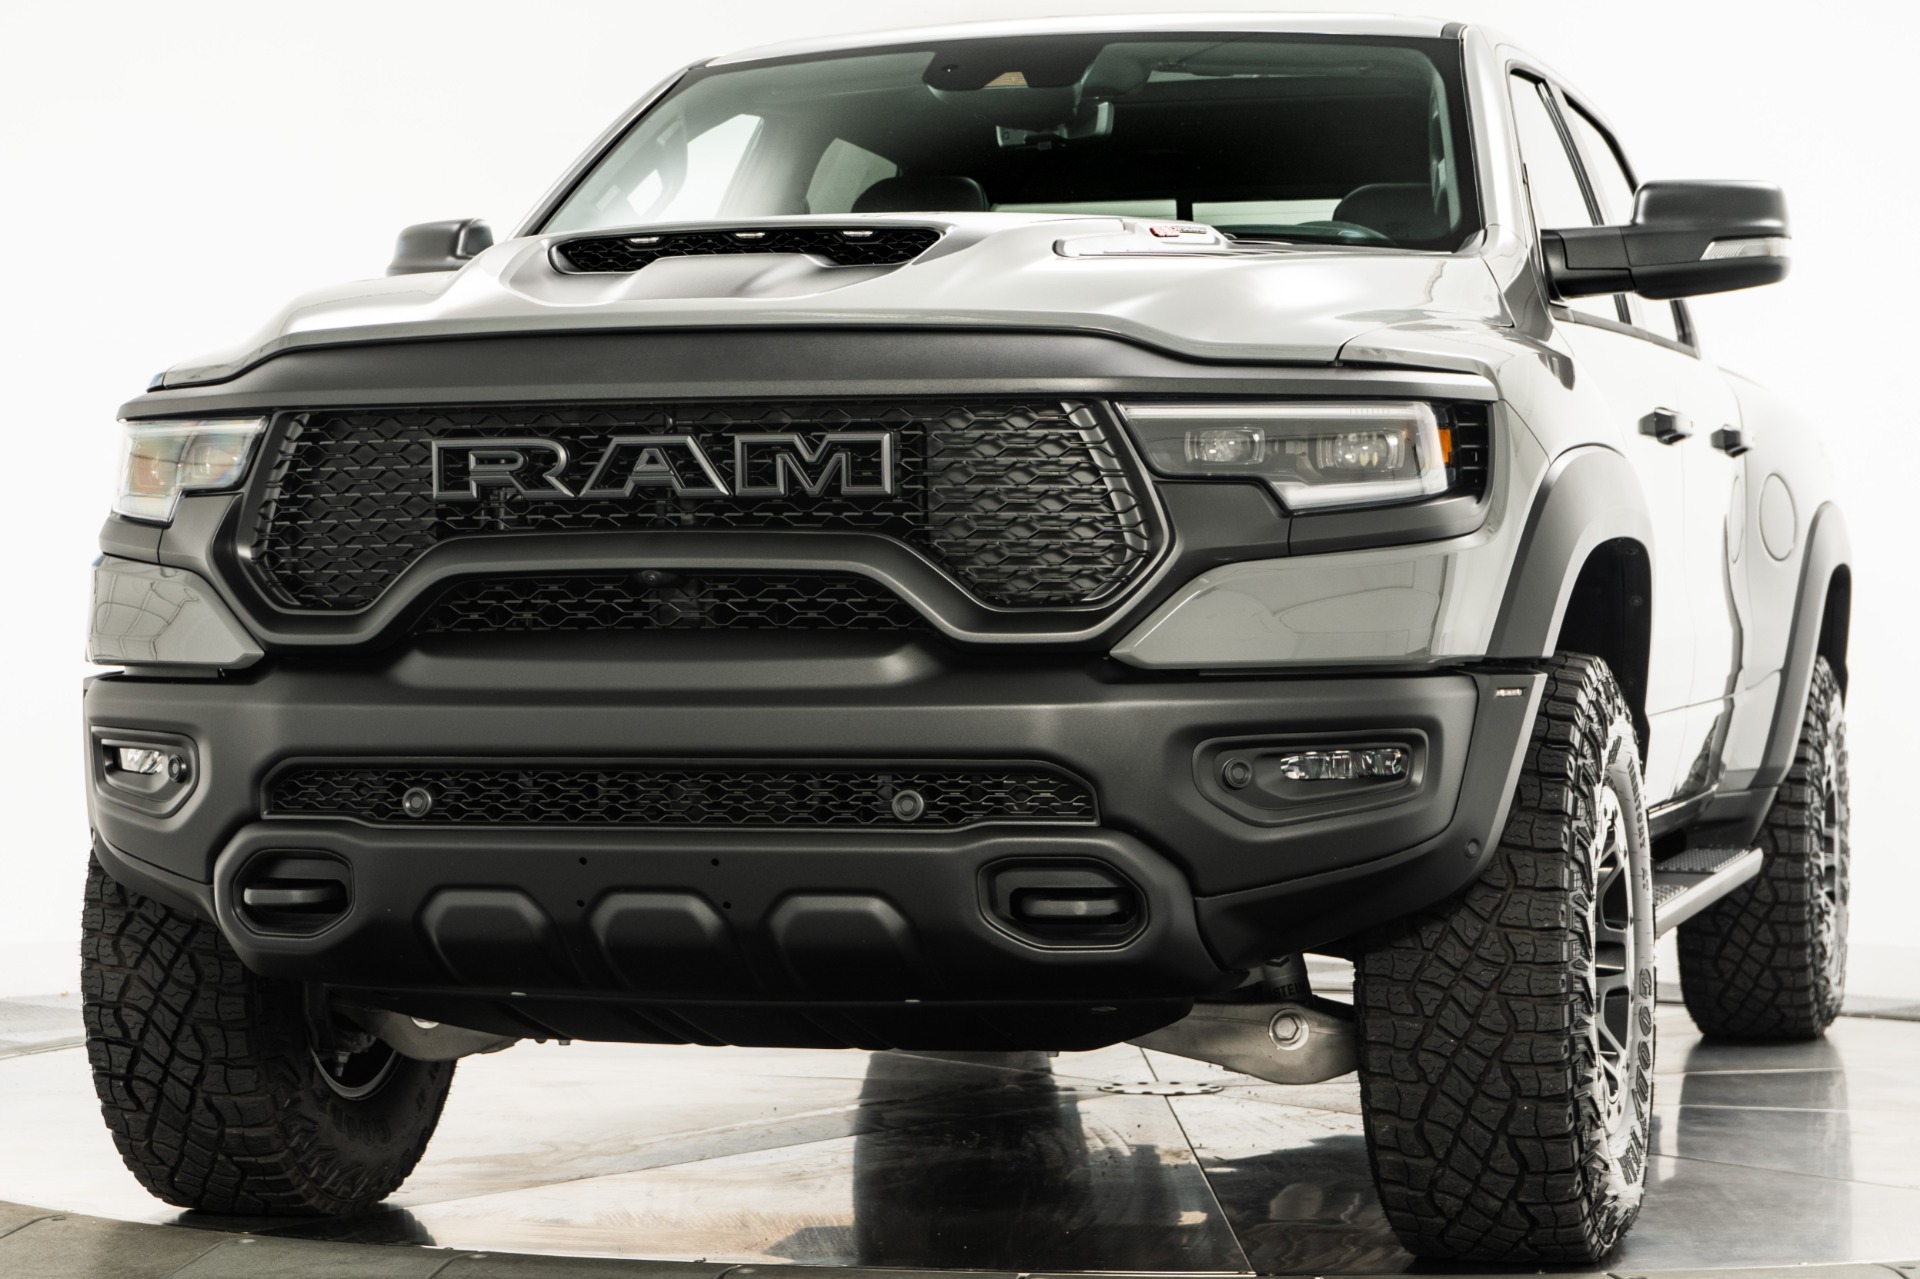 2023 Ram Refresh Spied by GM Authority Crew Flaunting High-Output Engine,  Night Edition Package